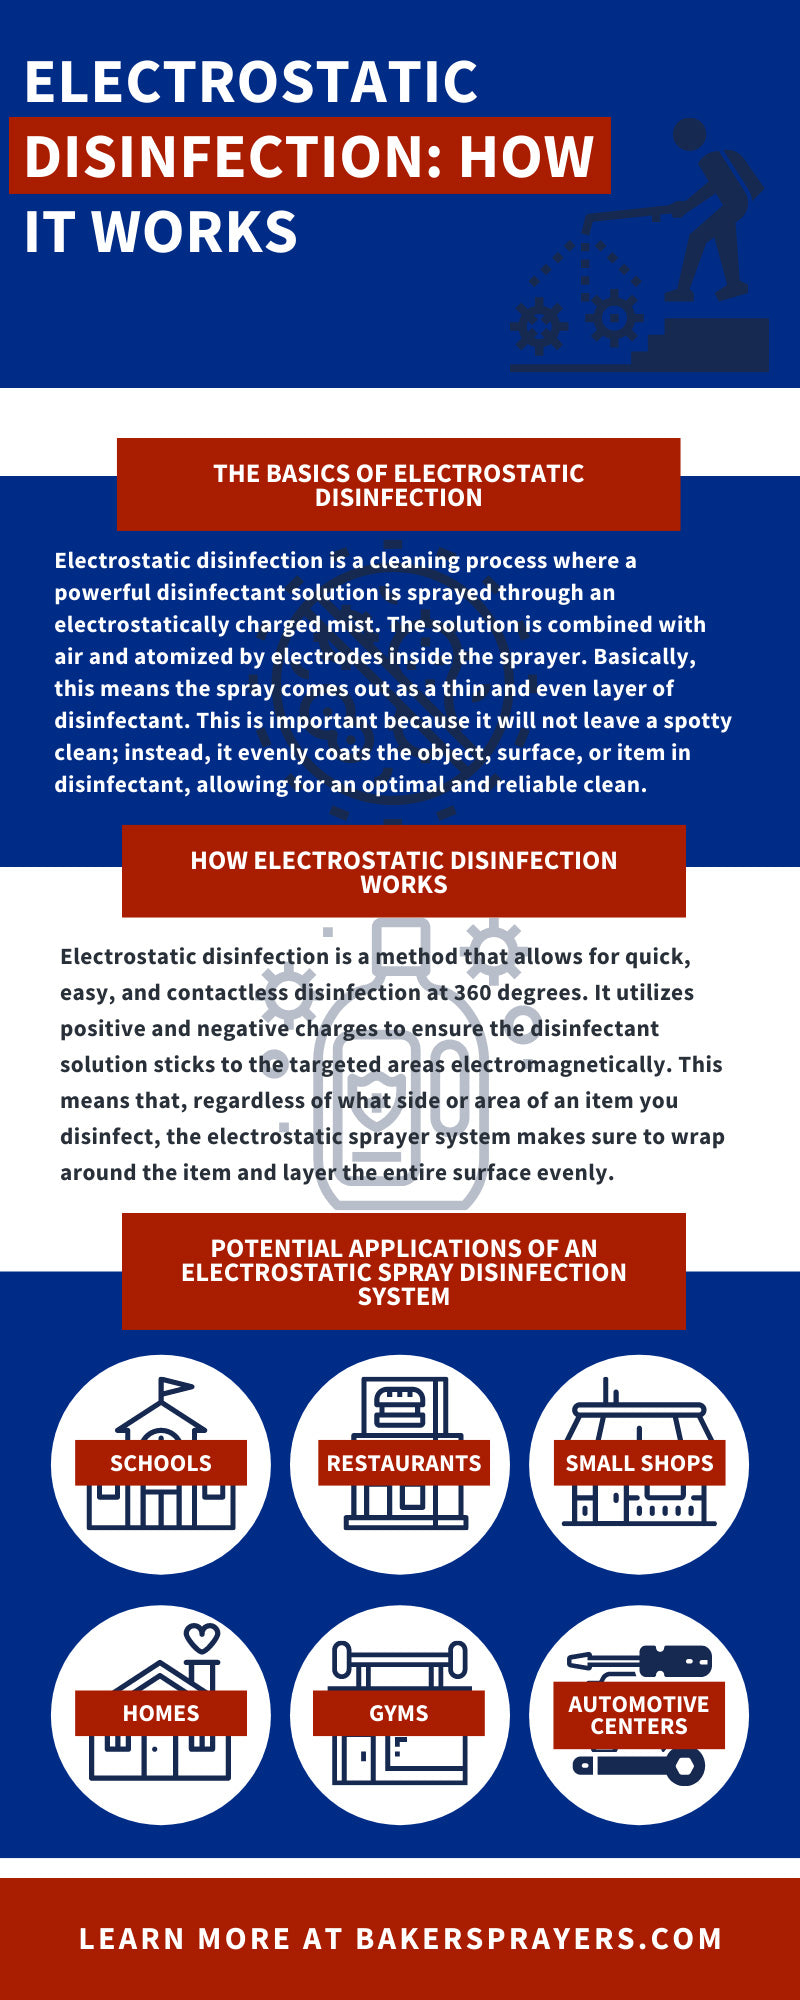 Electrostatic Disinfection: How It Works